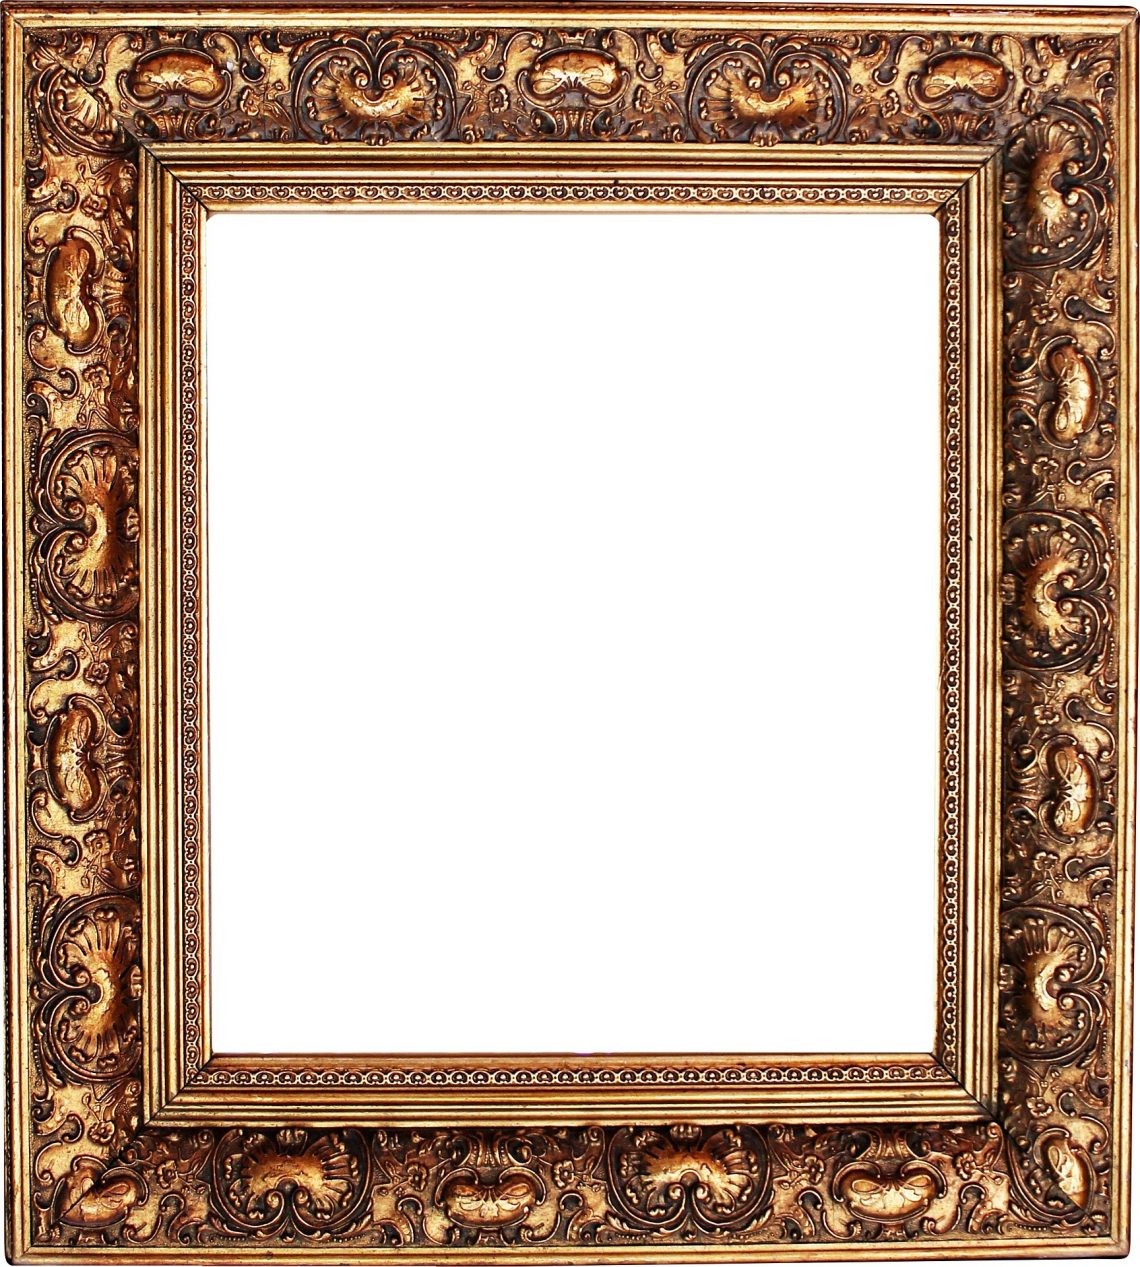 How To Buy Framing Supplies - A Quick Guide - Article Gen